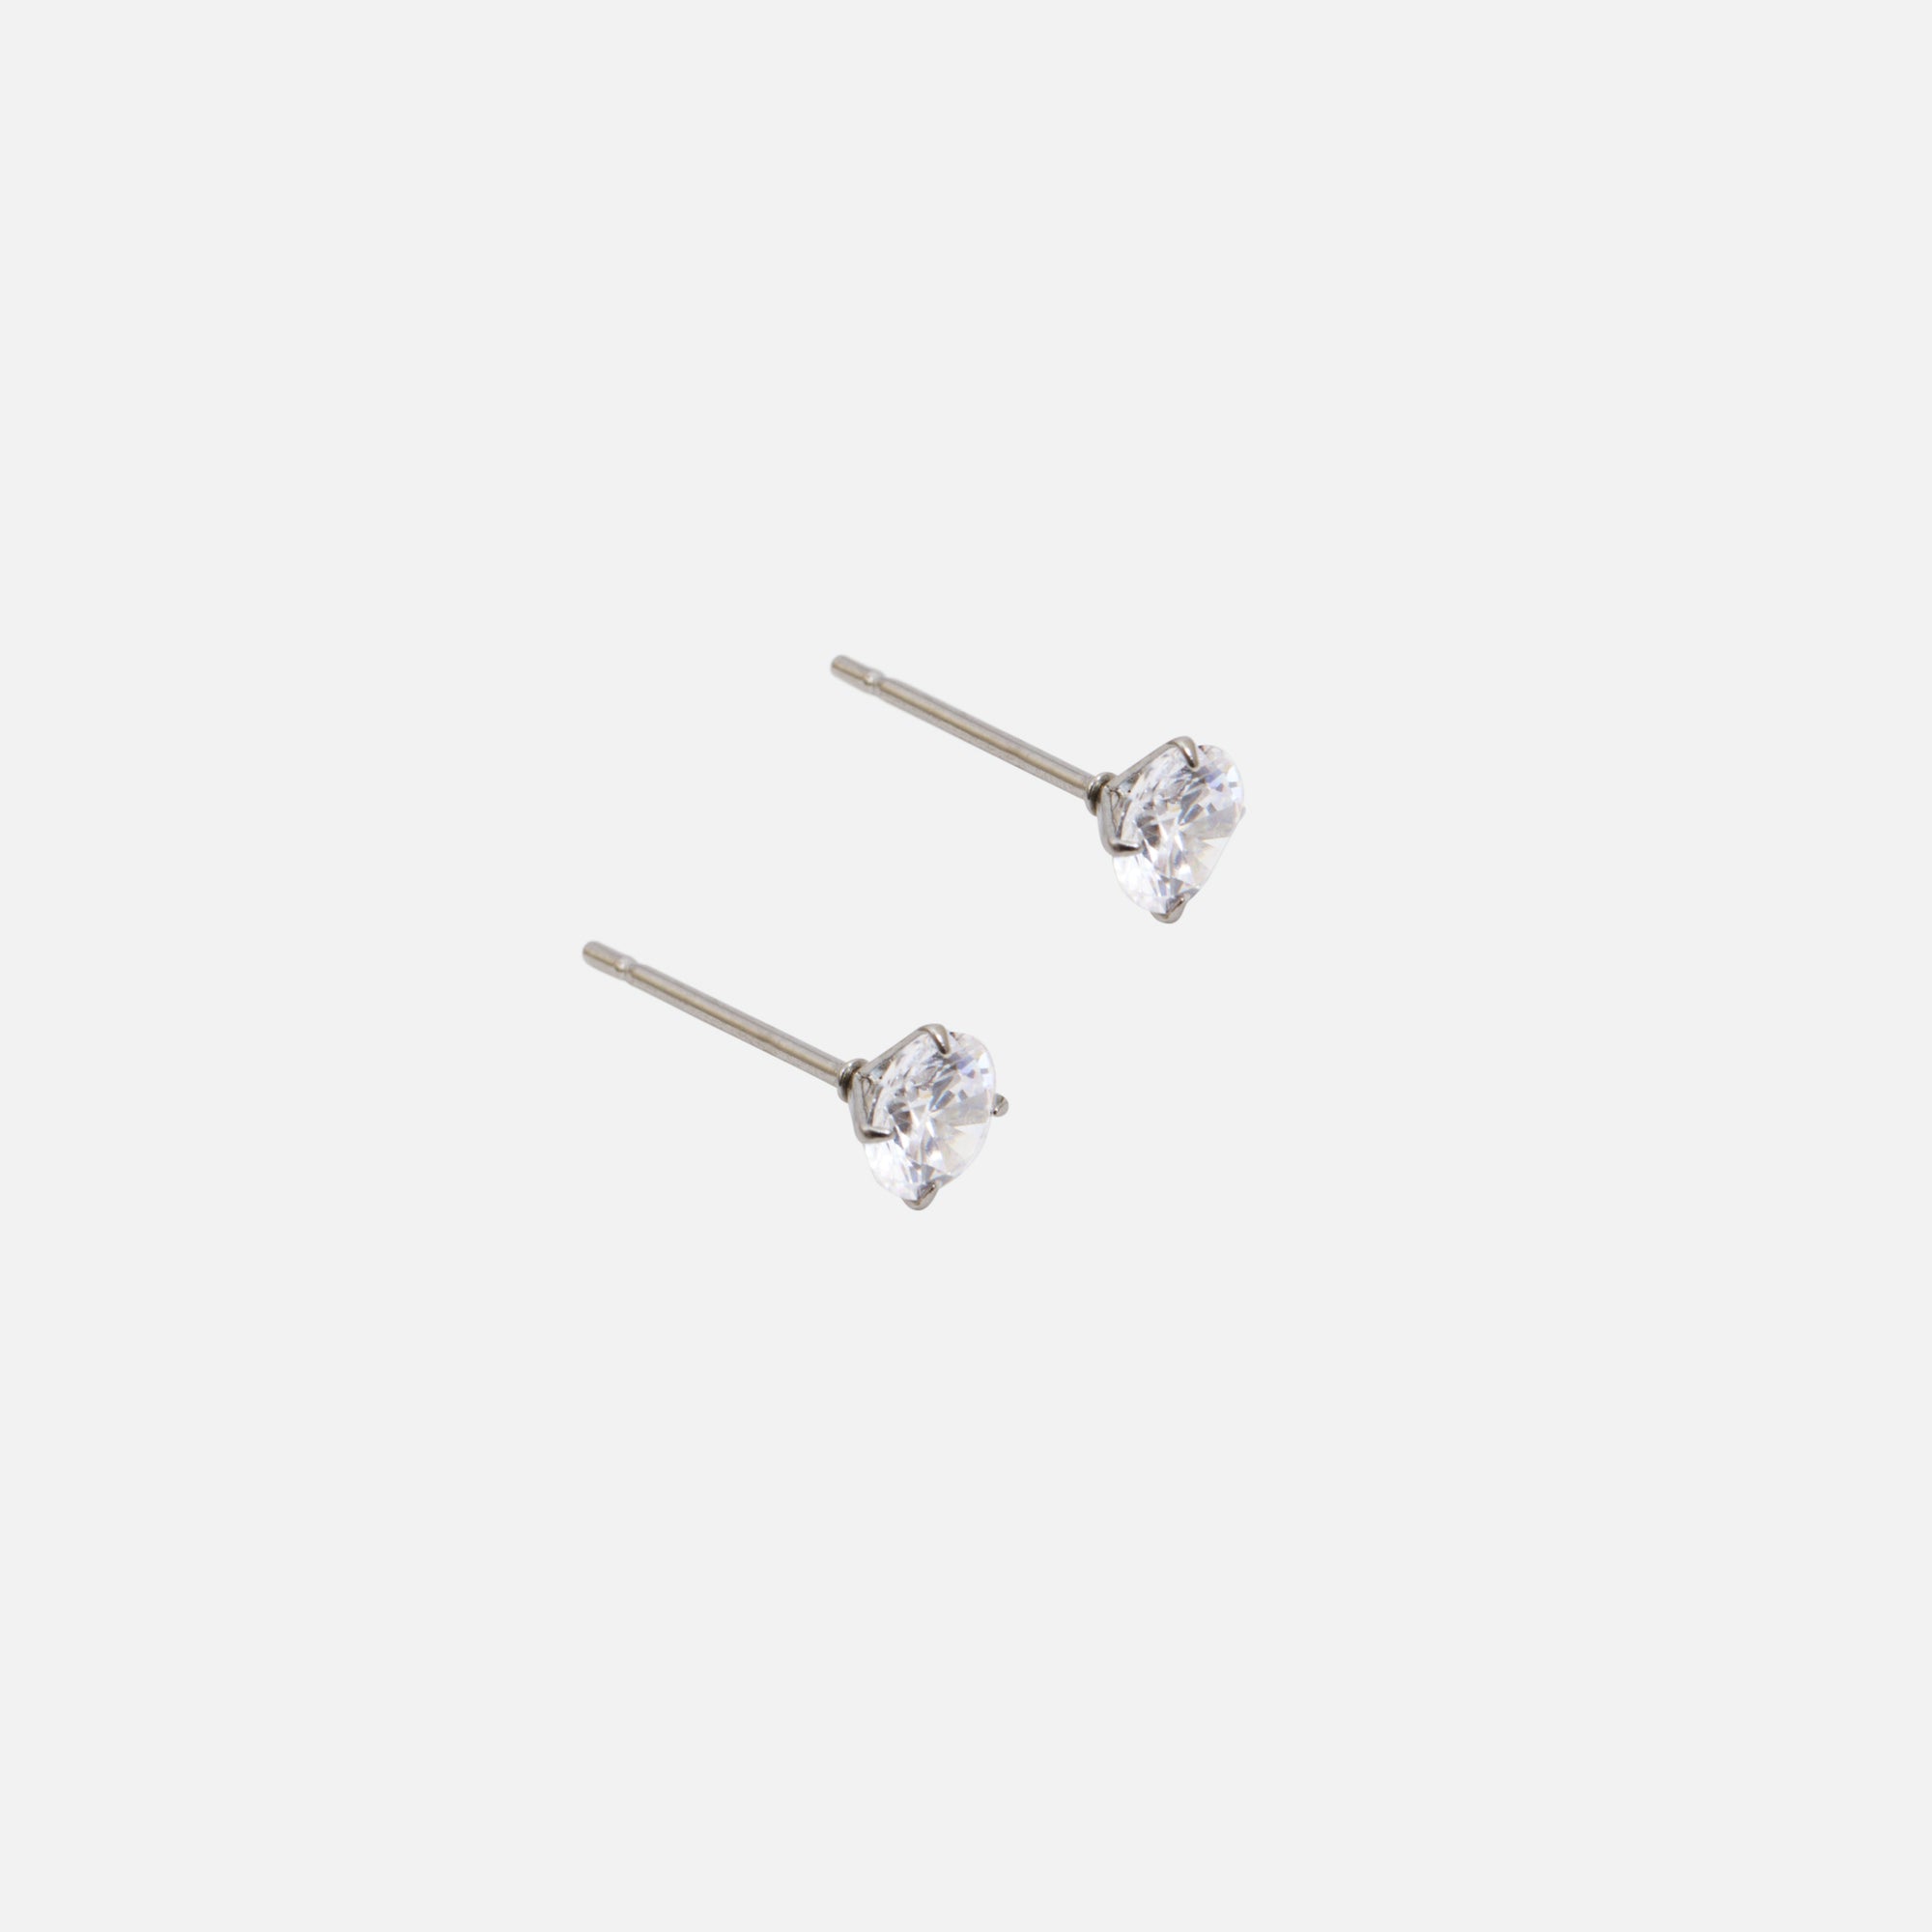 Fixed stainless steel earrings with cubic zirconia